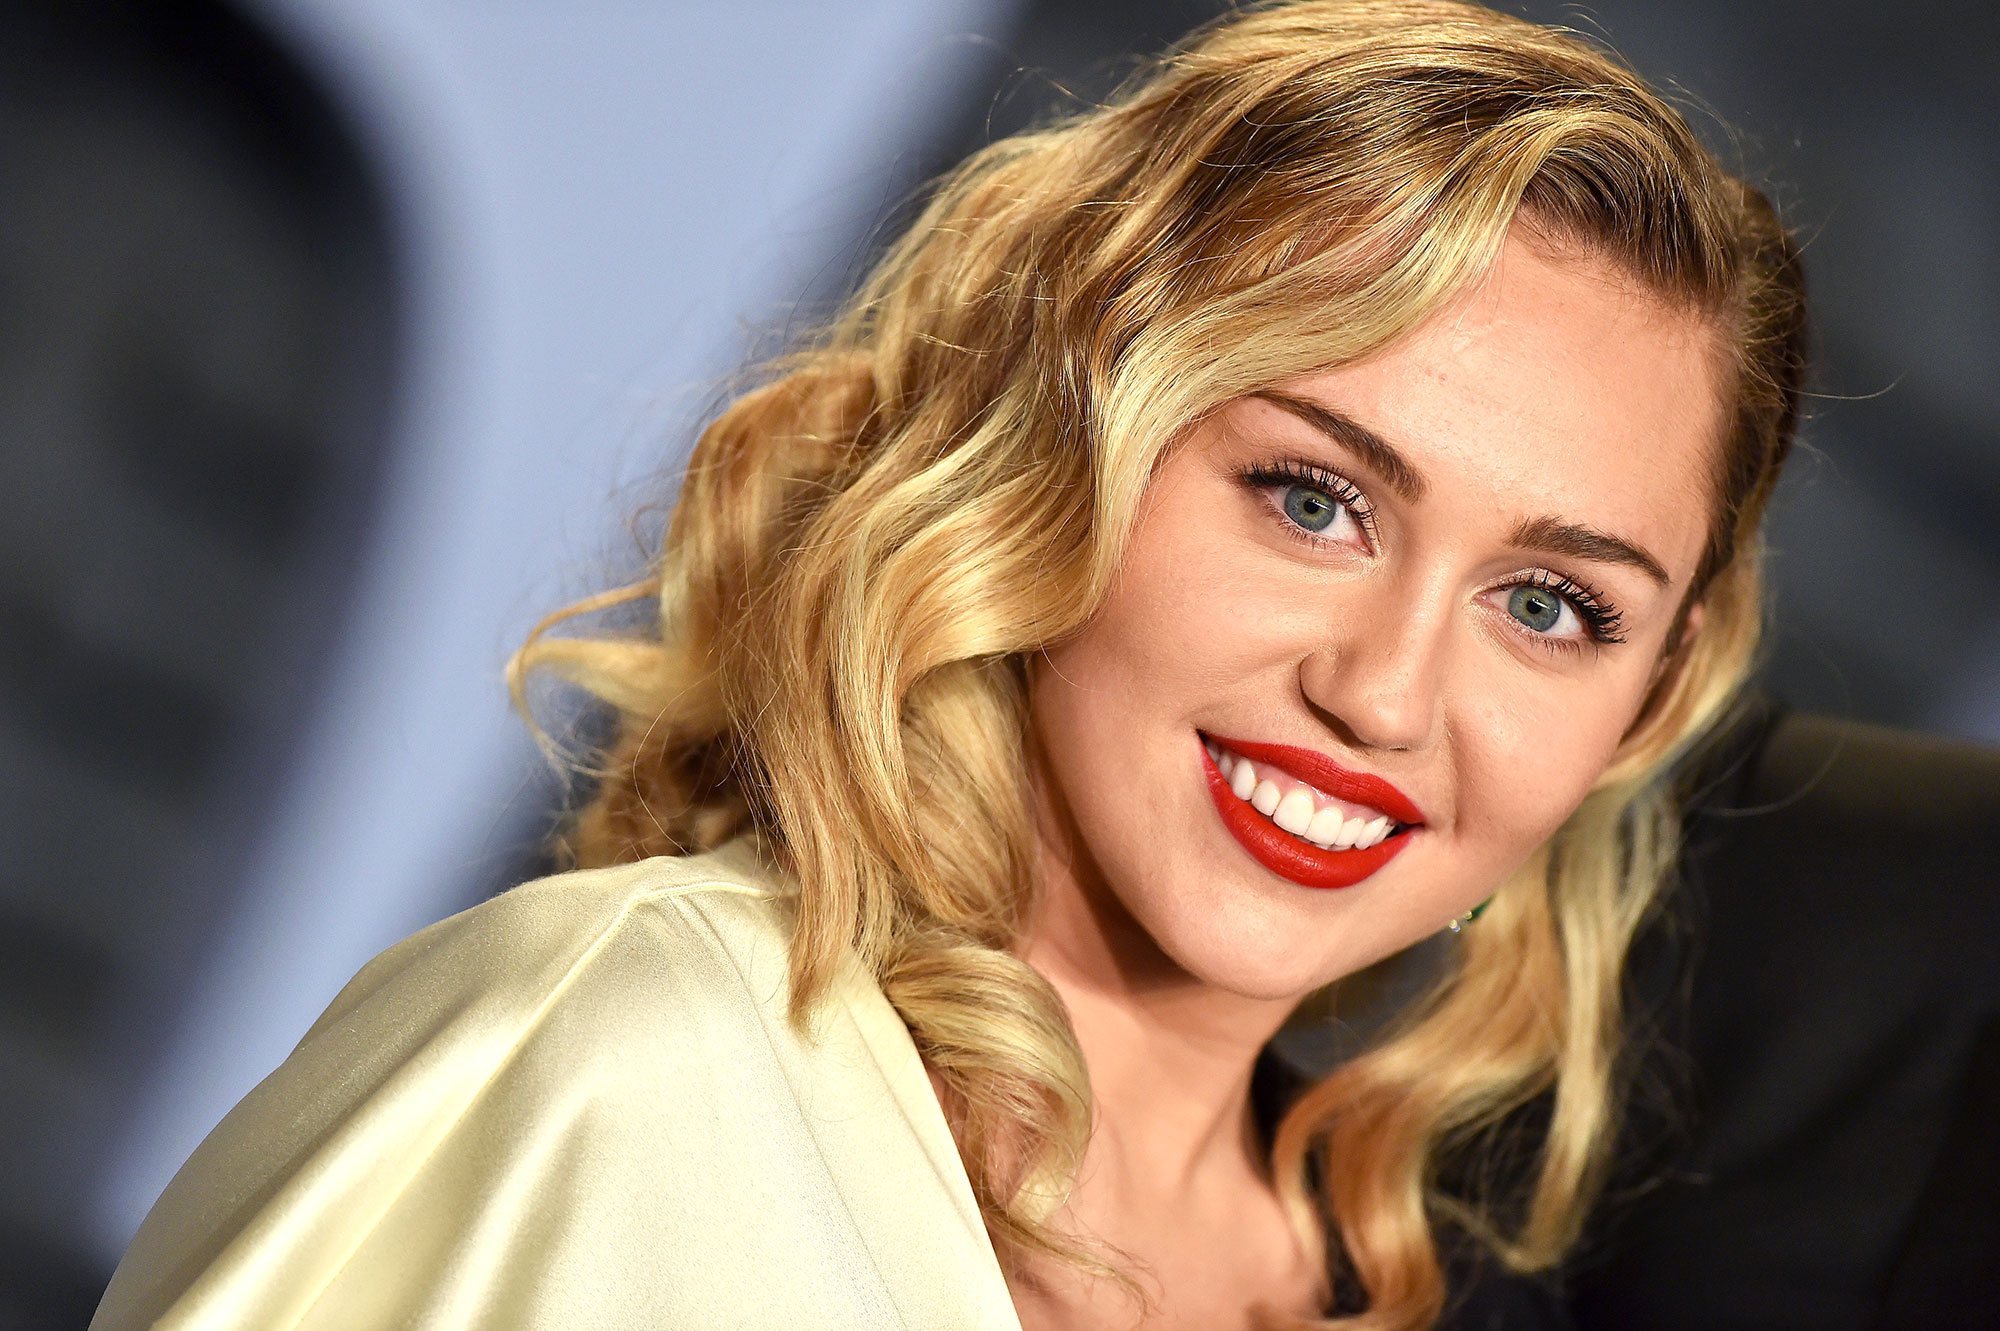 Miley Cyrus Tentacle Porn - Miley Cyrus' Dating History: Timeline of Her Famous Exes, Flings